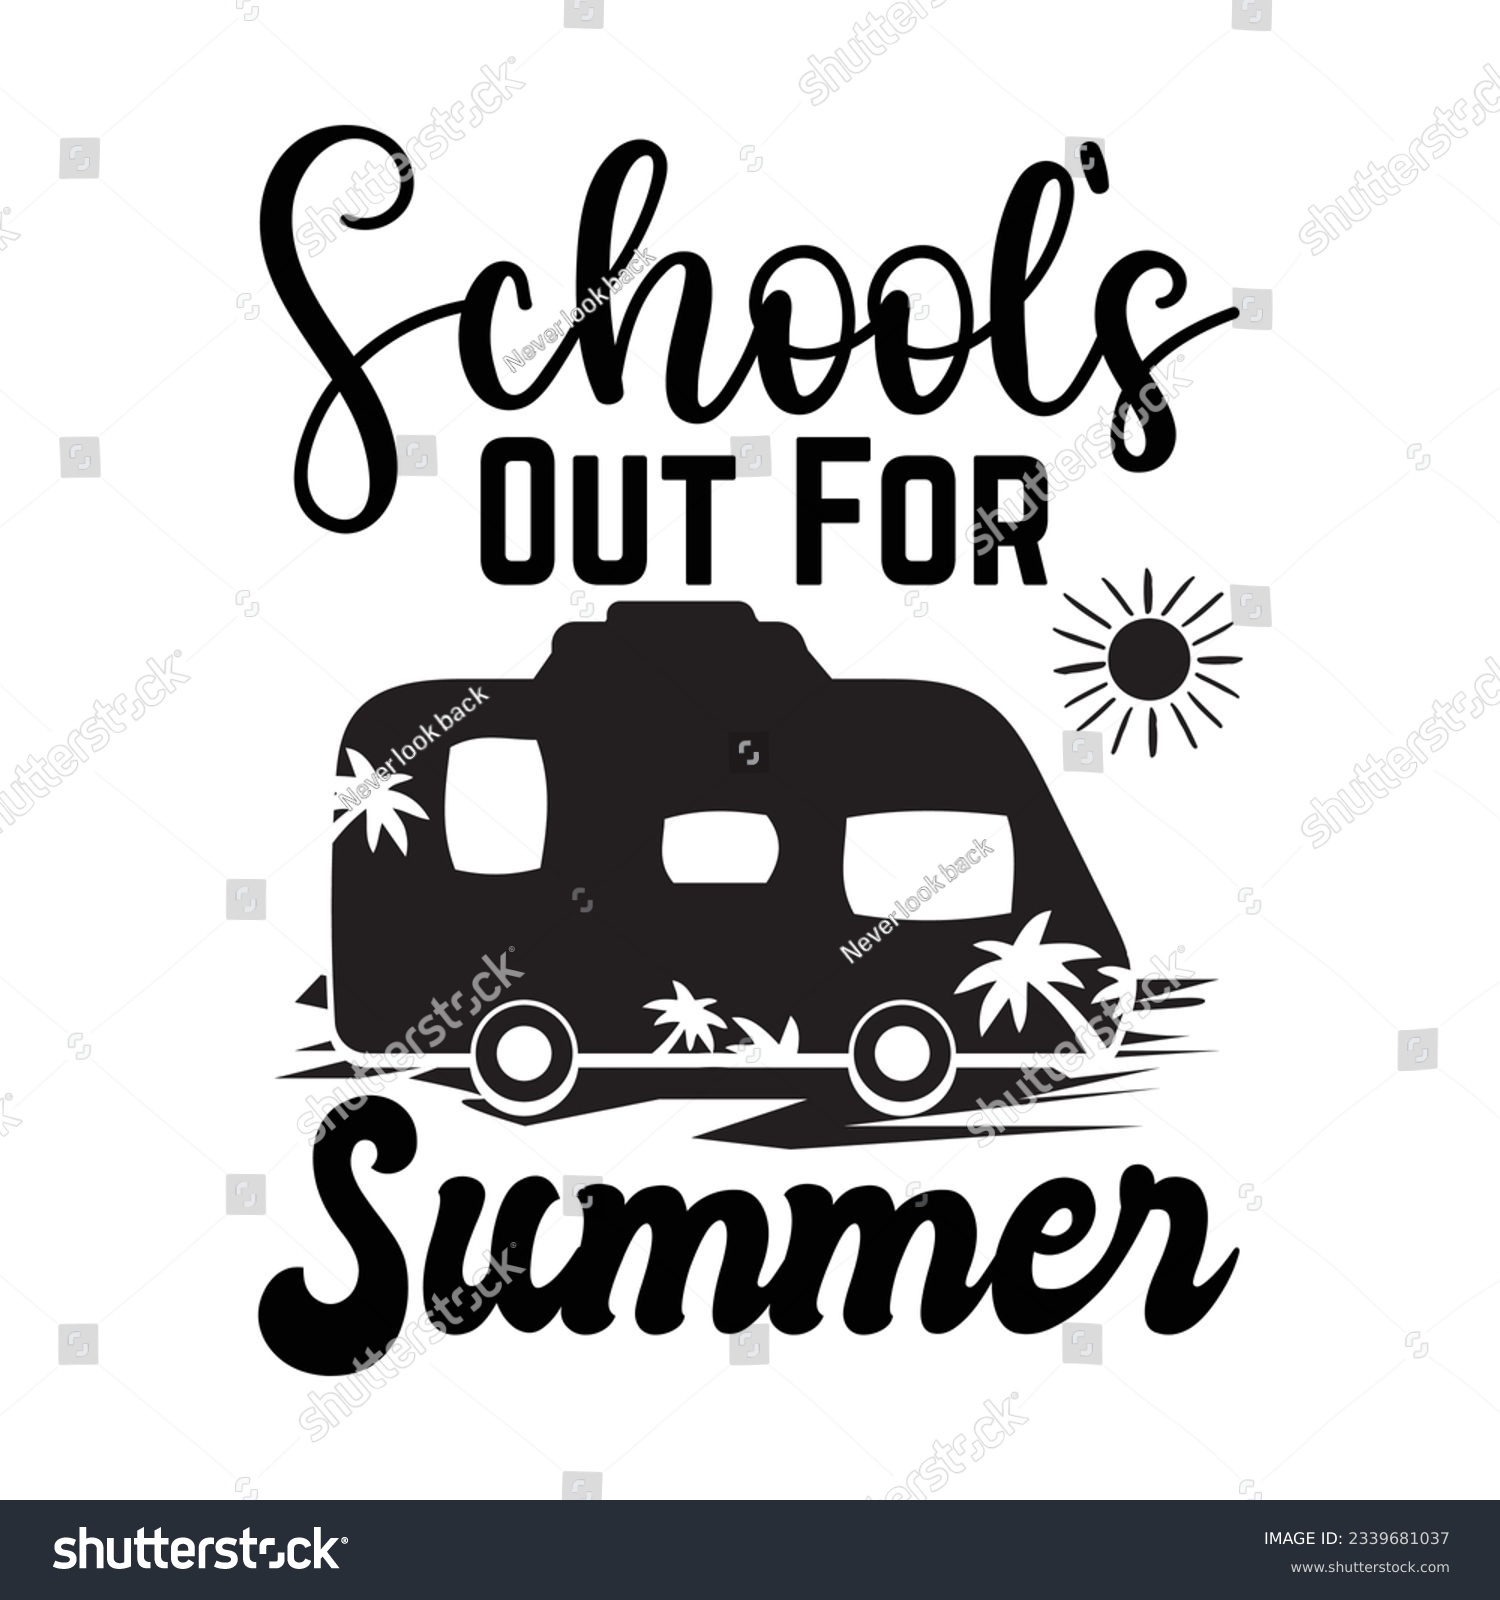 SVG of school's out for summer SVG t-shirt design, summer SVG, summer quotes  SVG, waves SVG, beach , summer time  , Hand drawn vintage illustration with lettering and decoration elements svg